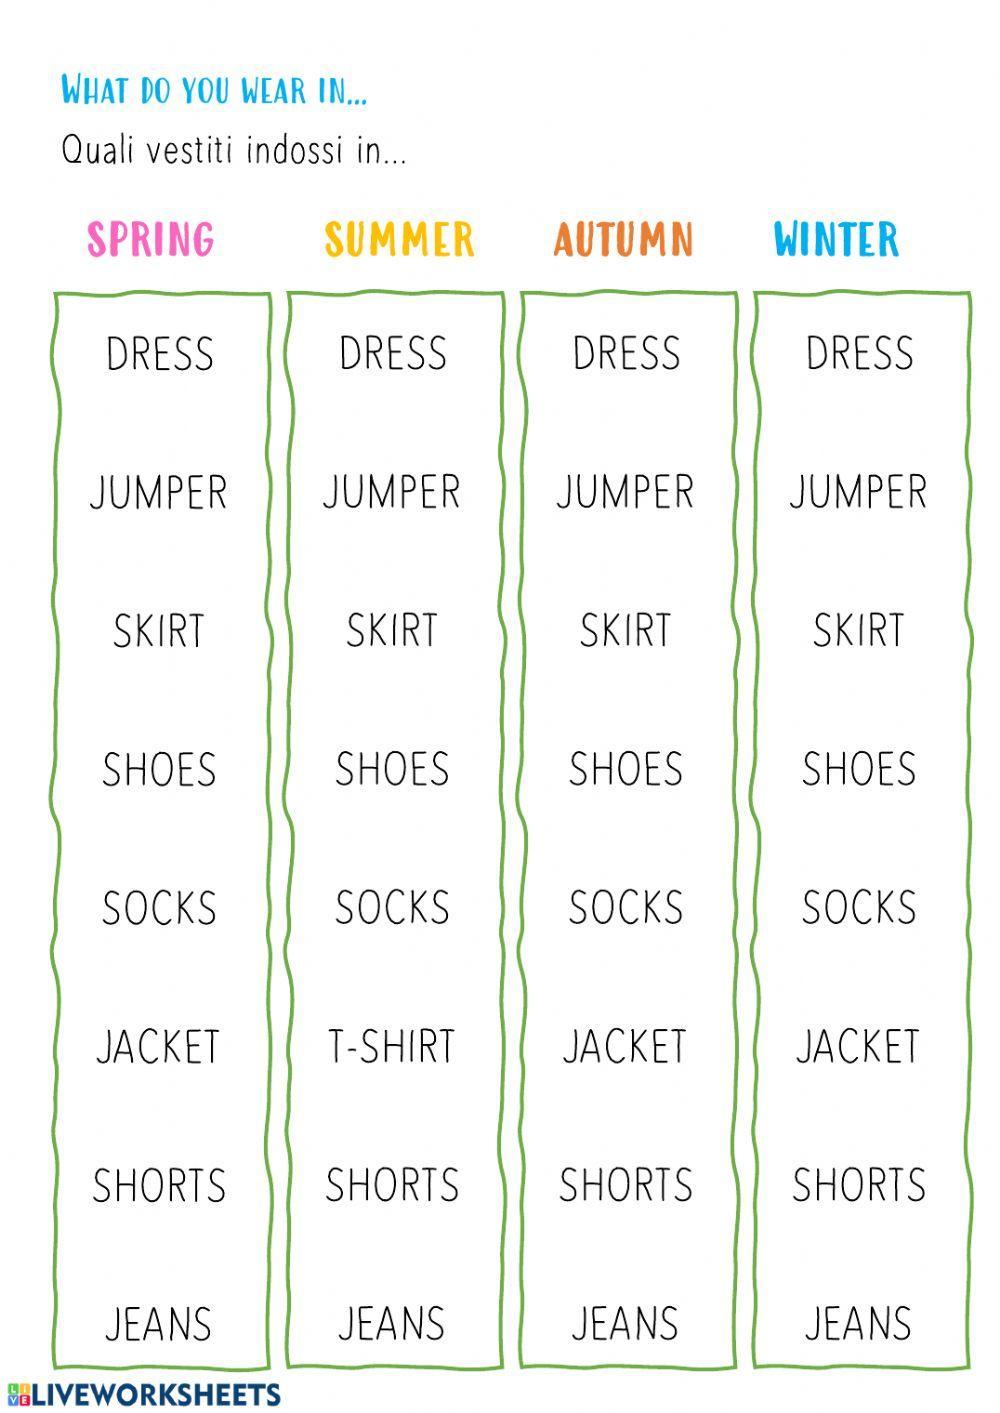 Clothes and Seasons